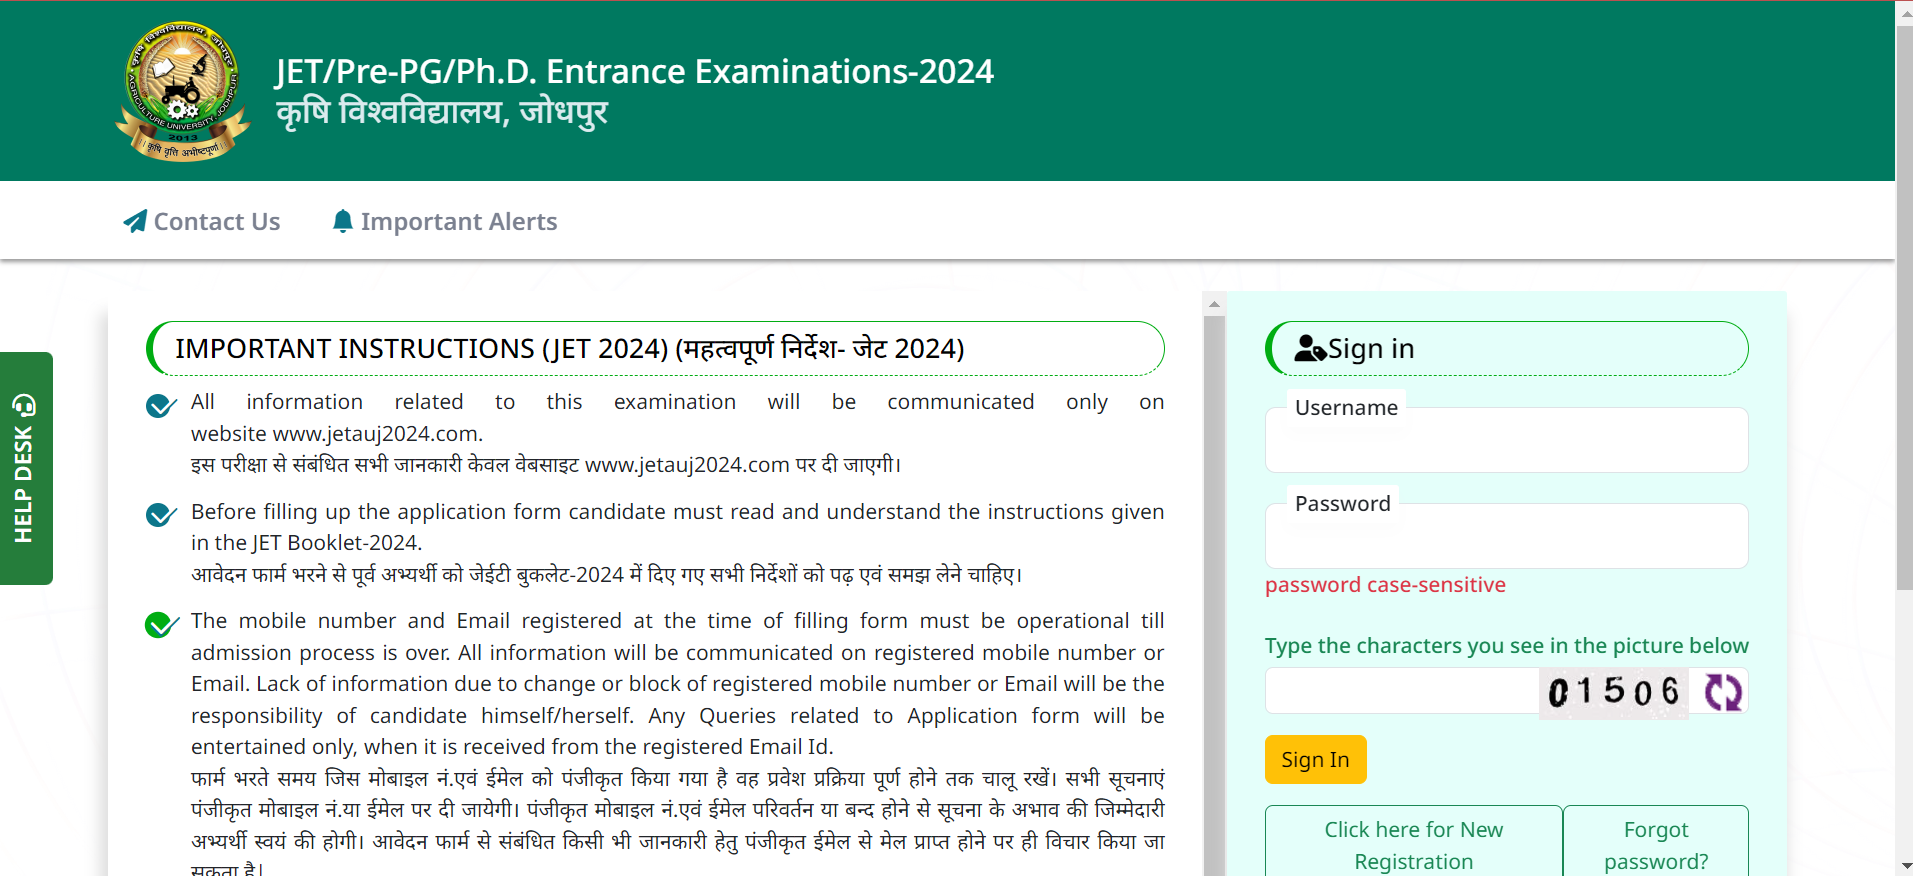 JET UG /Pre-PG/Ph.D. Entrance Examinations-2024 Notification, Admit Card, Exam Pattern, Counselling